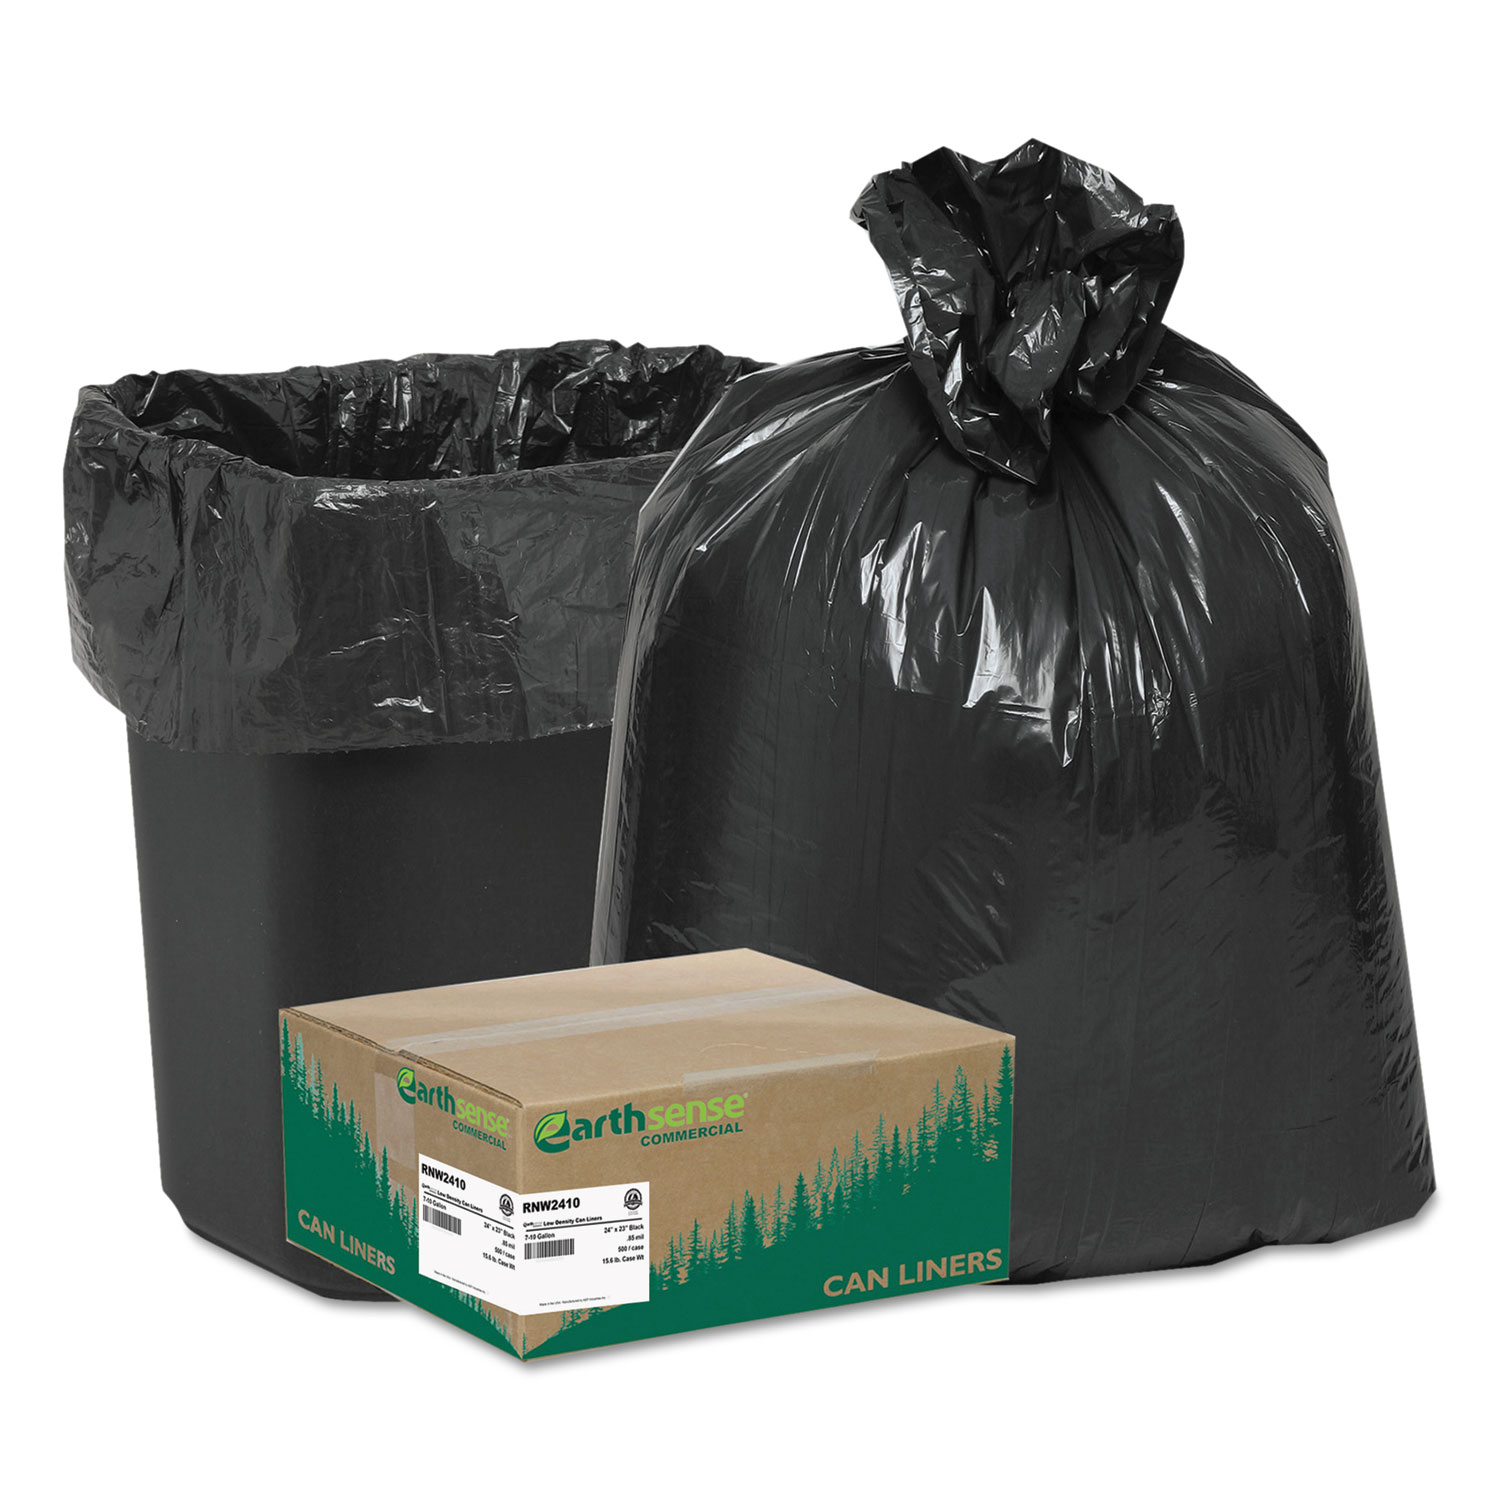  Earthsense Commercial RNW2410 Linear Low Density Recycled Can Liners, 10 gal, 0.85 mil, 24 x 23, Black, 500/Carton (WBIRNW2410) 